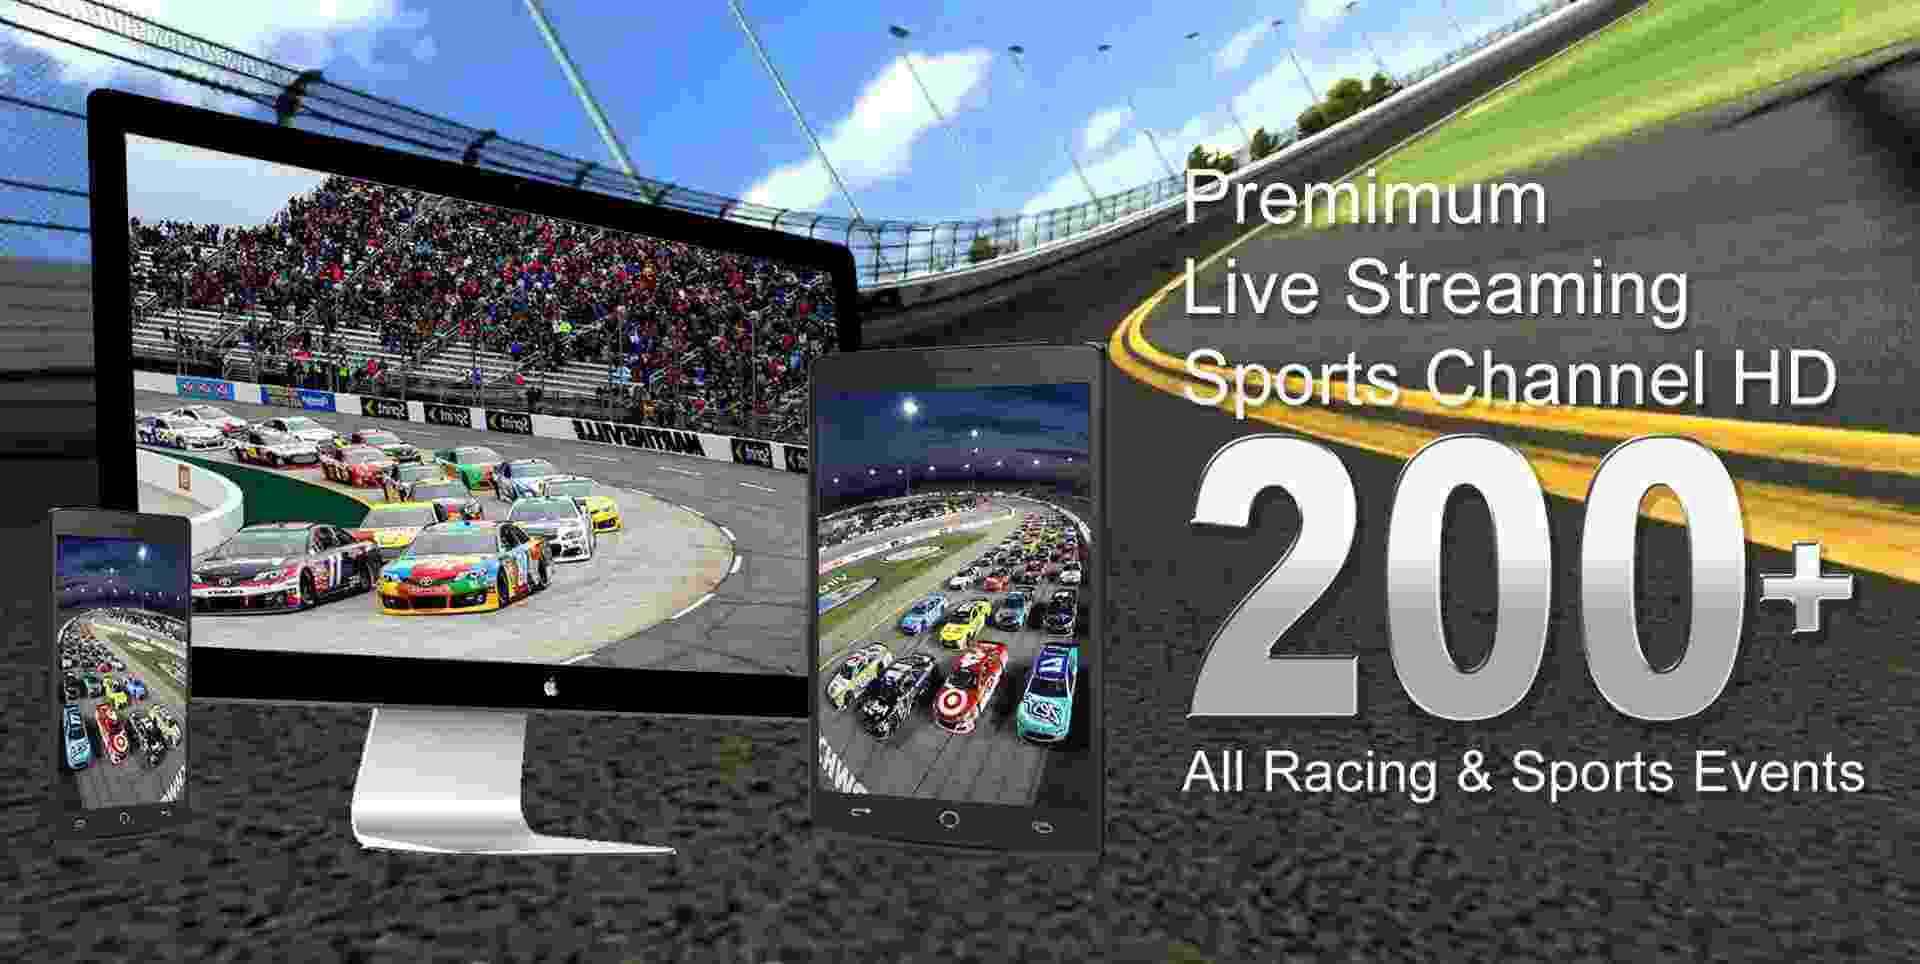 200-buckle-up-2015-live-streaming